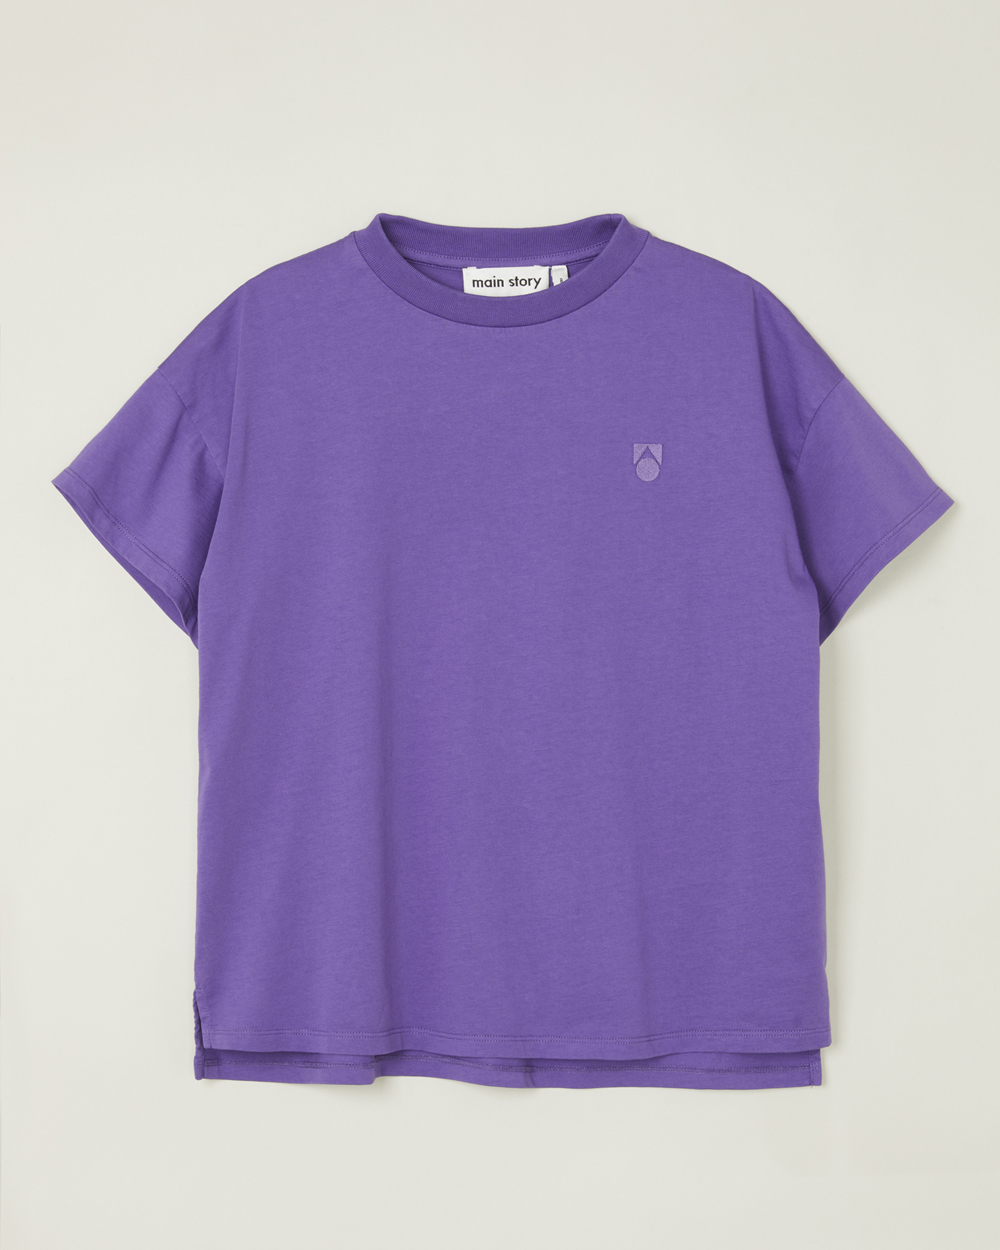 [MAINSTORY]Oversized Tee - Passion Flower [4Y]